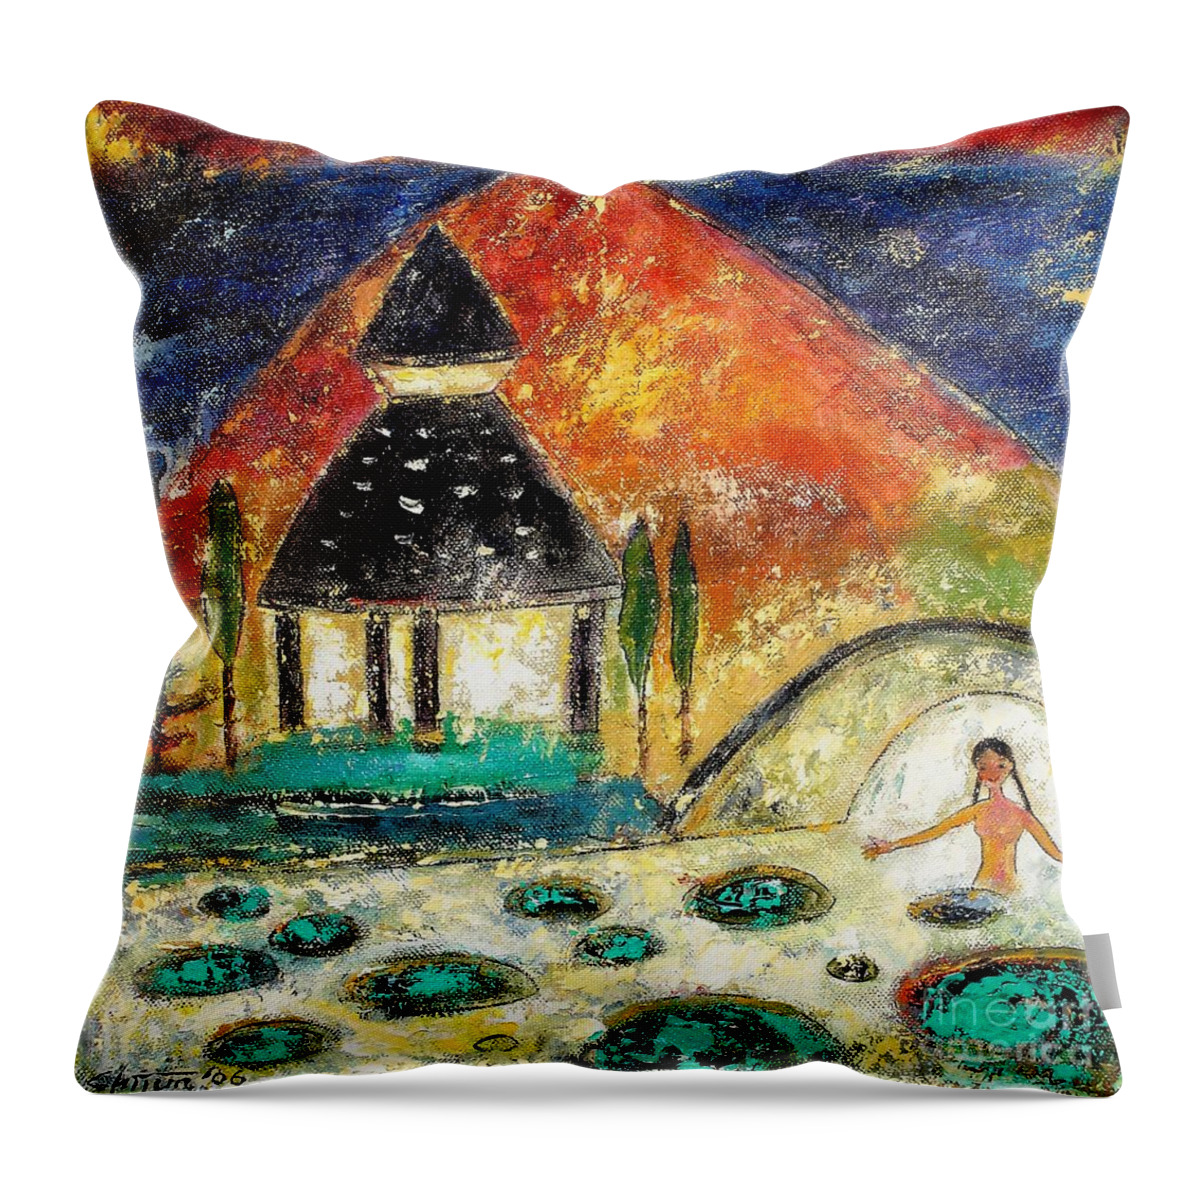 Landscape Throw Pillow featuring the painting Mystical Garden I by Shijun Munns